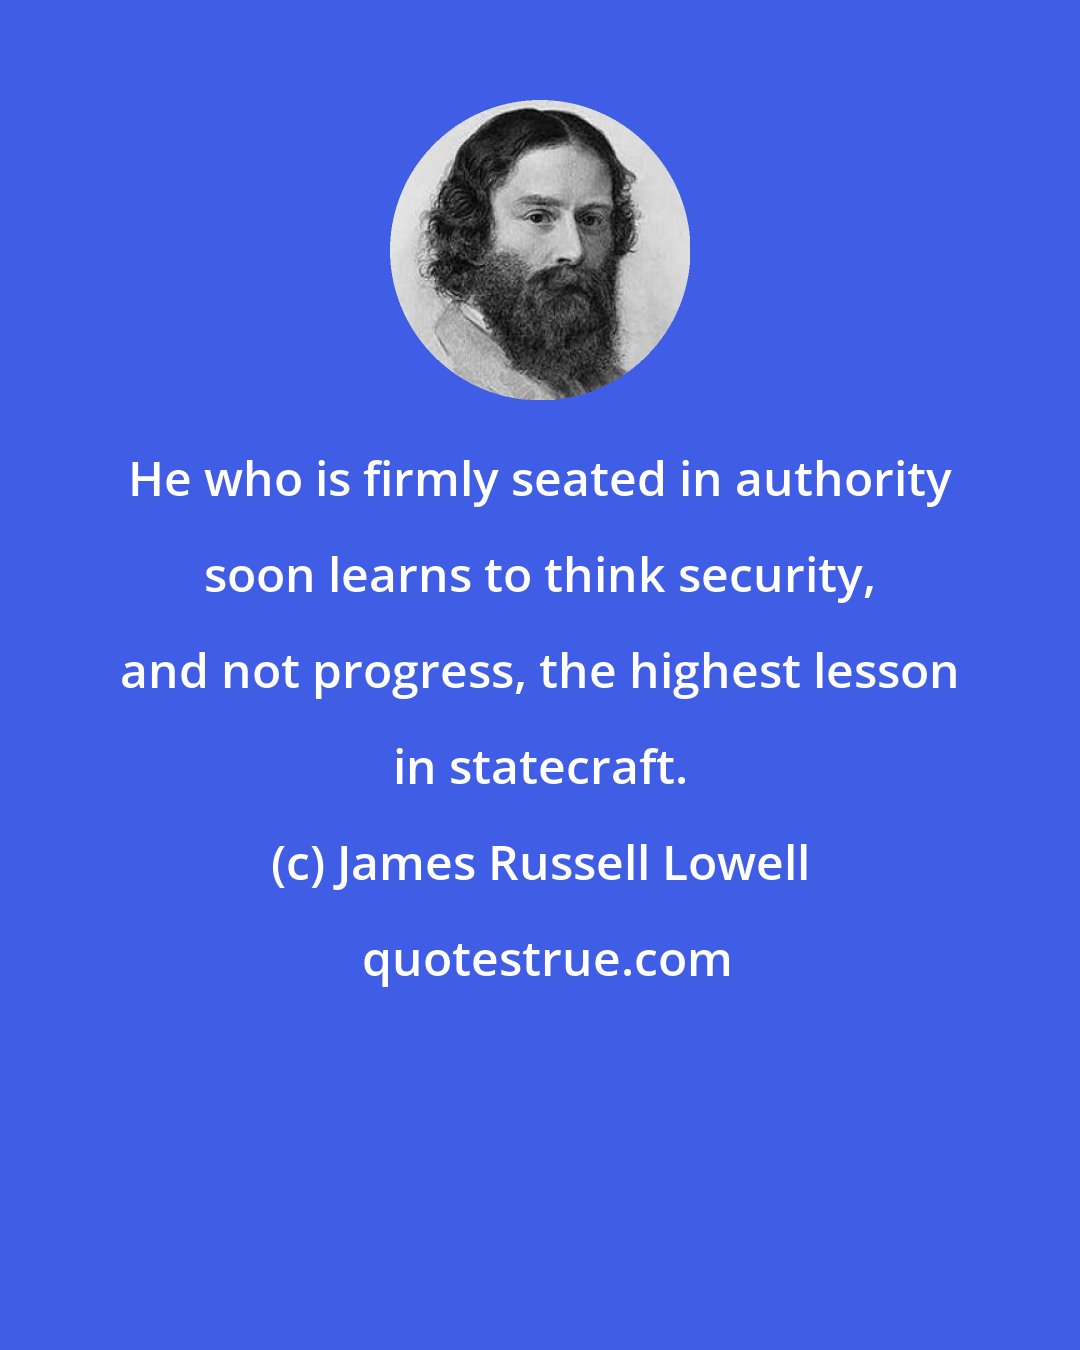 James Russell Lowell: He who is firmly seated in authority soon learns to think security, and not progress, the highest lesson in statecraft.